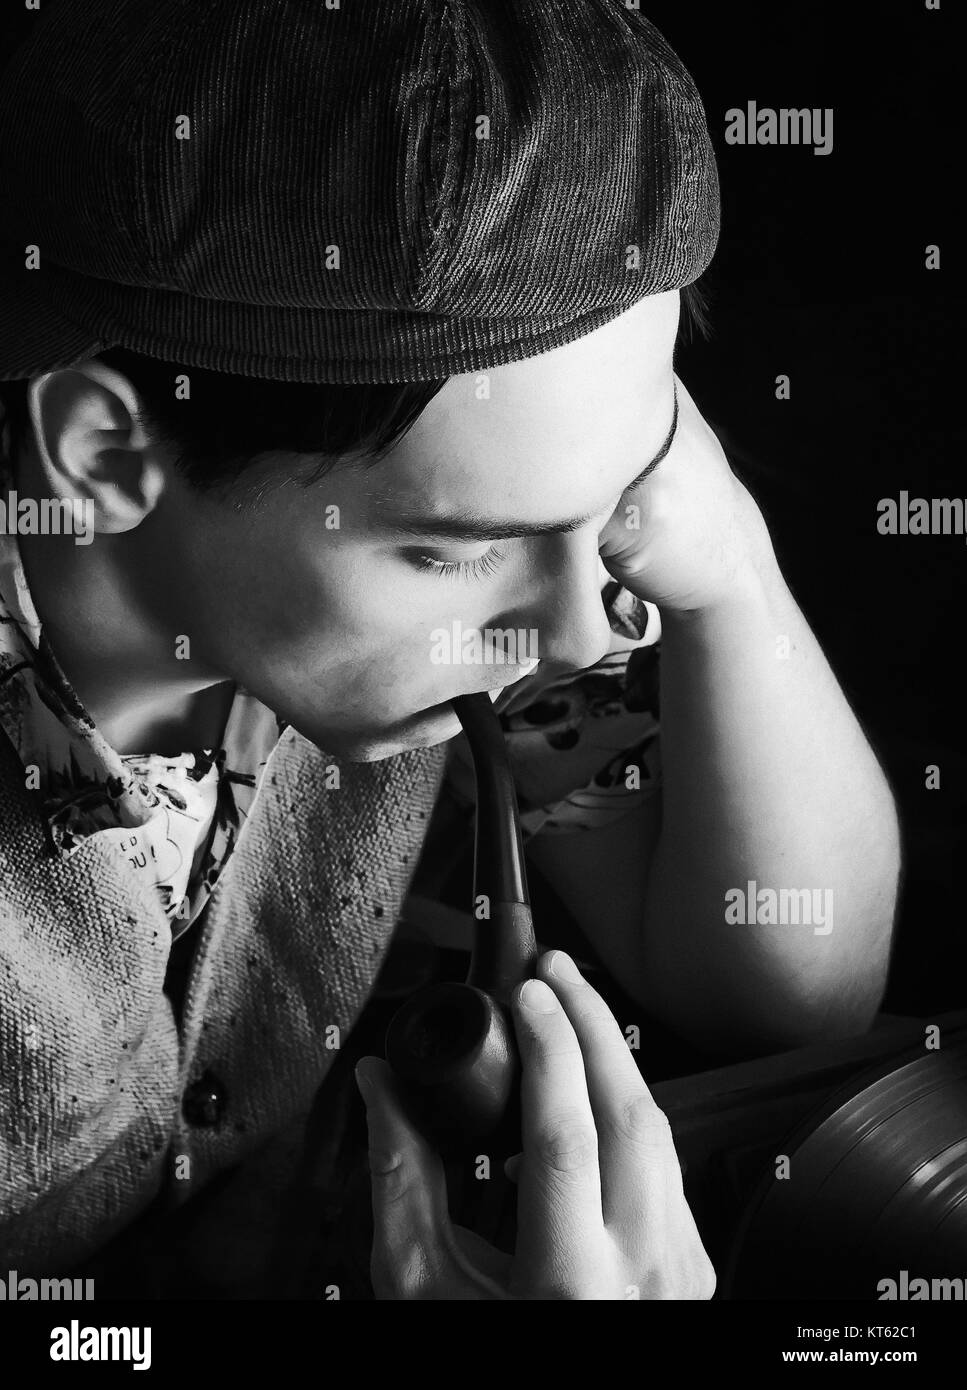 Monochrome Vintage Portrait Of A Man With Pipe Stock Photo